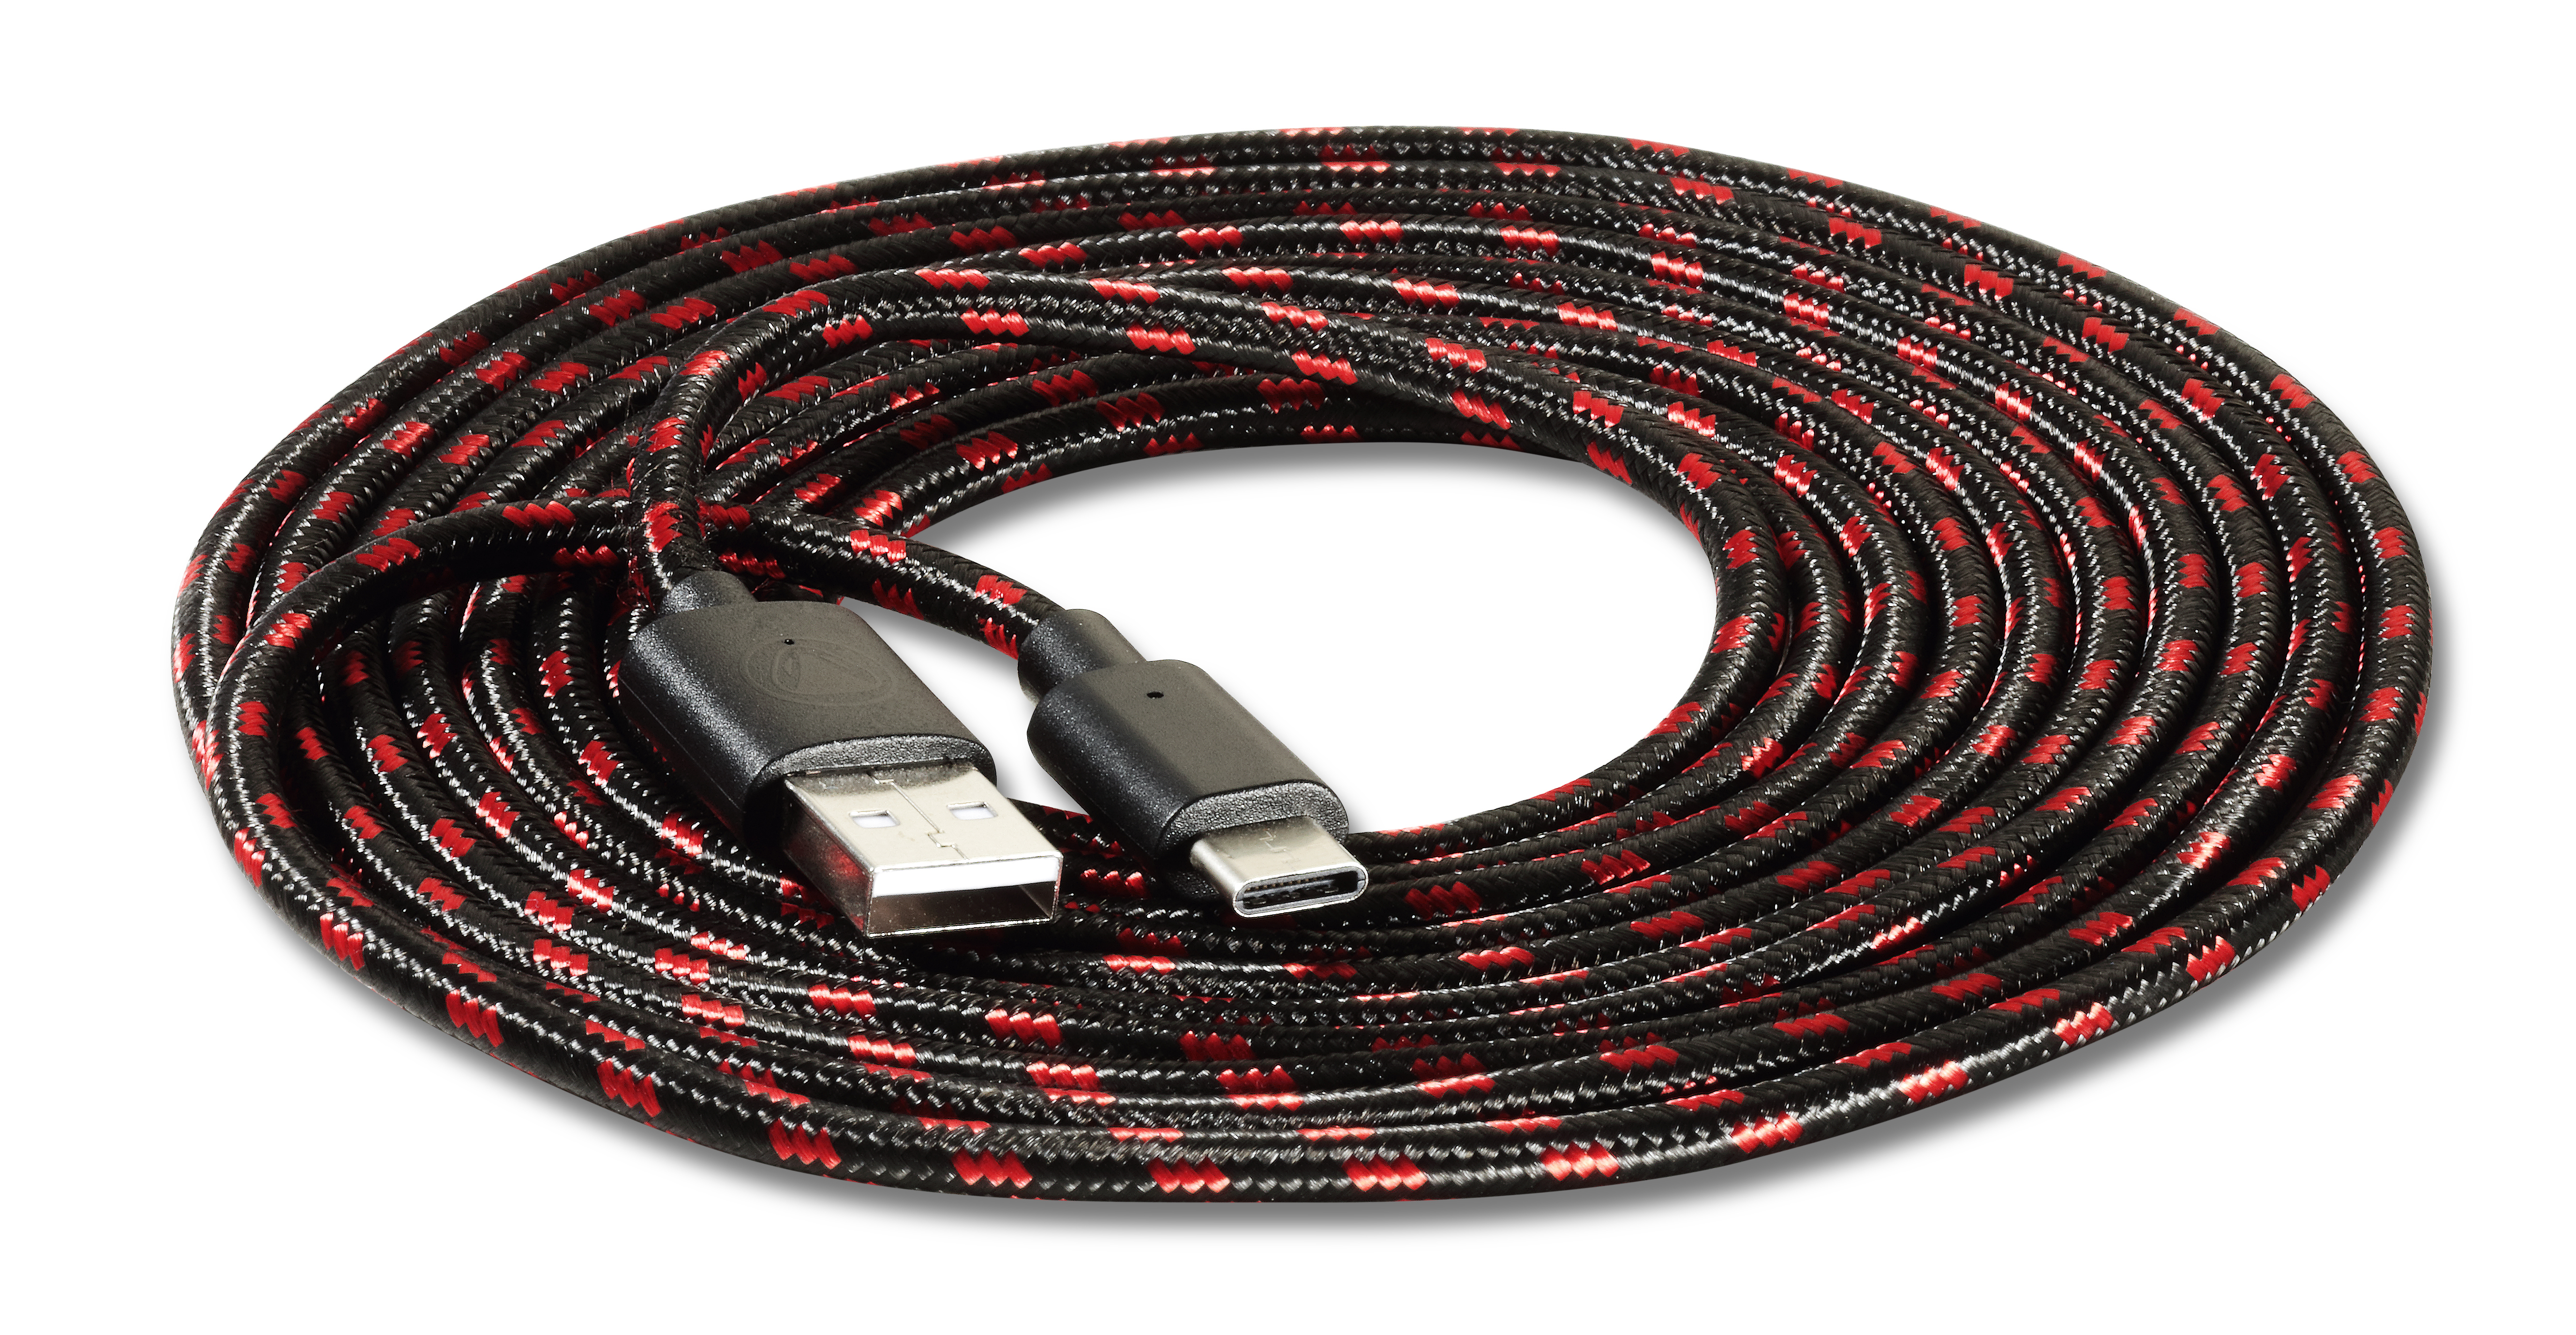 CHARGE:CABLE USB SNAKEBYTE NSW Kabel